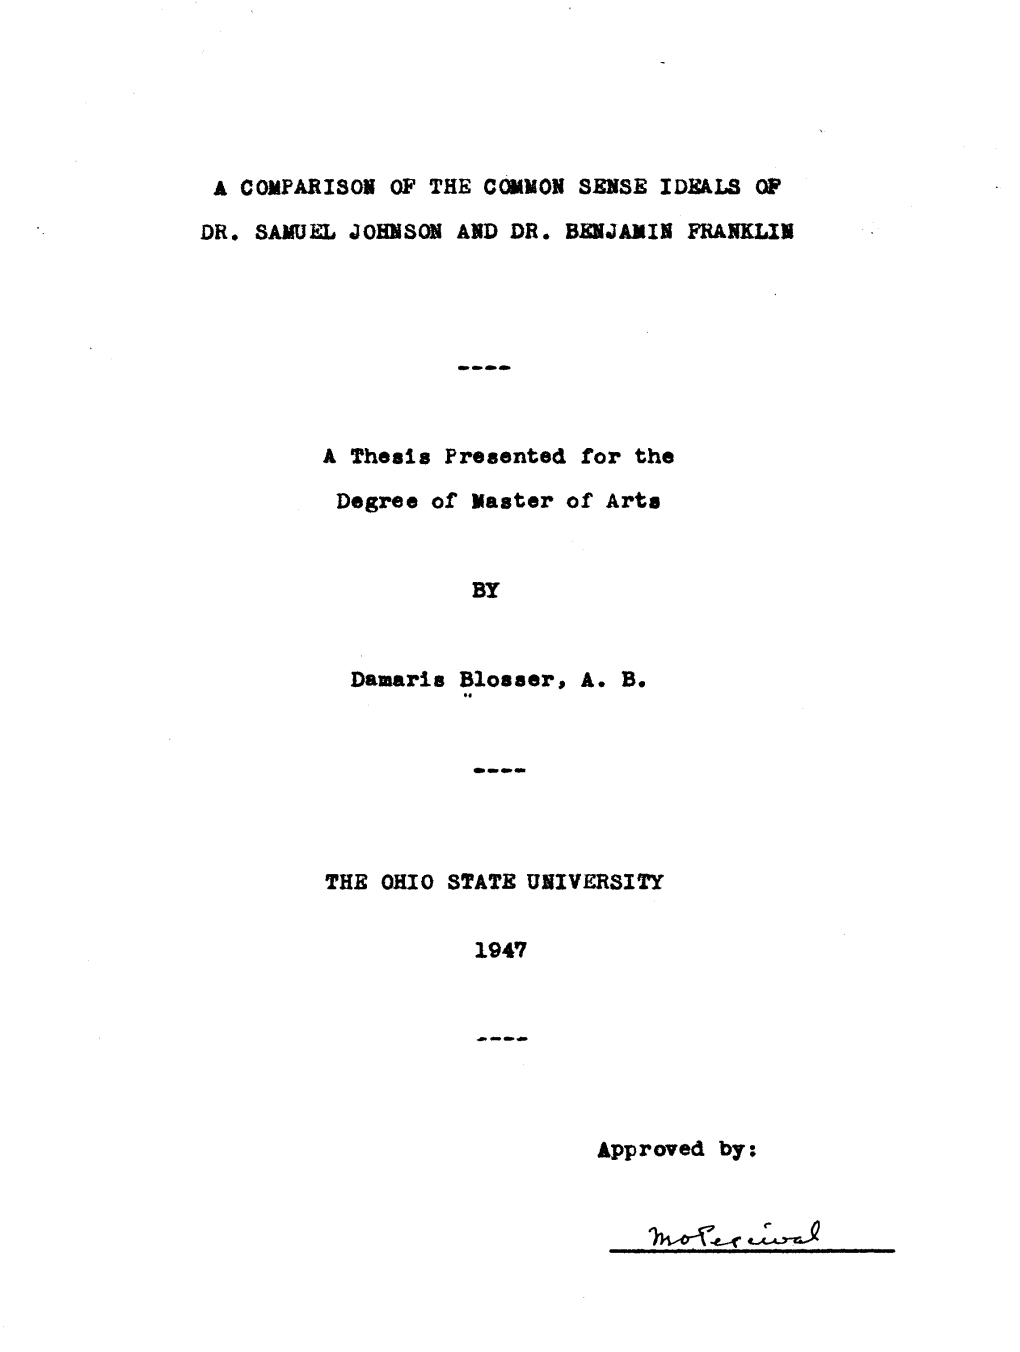 A Thesis Presented Tor the Damaris Blosser, A. B • 1947 Approved